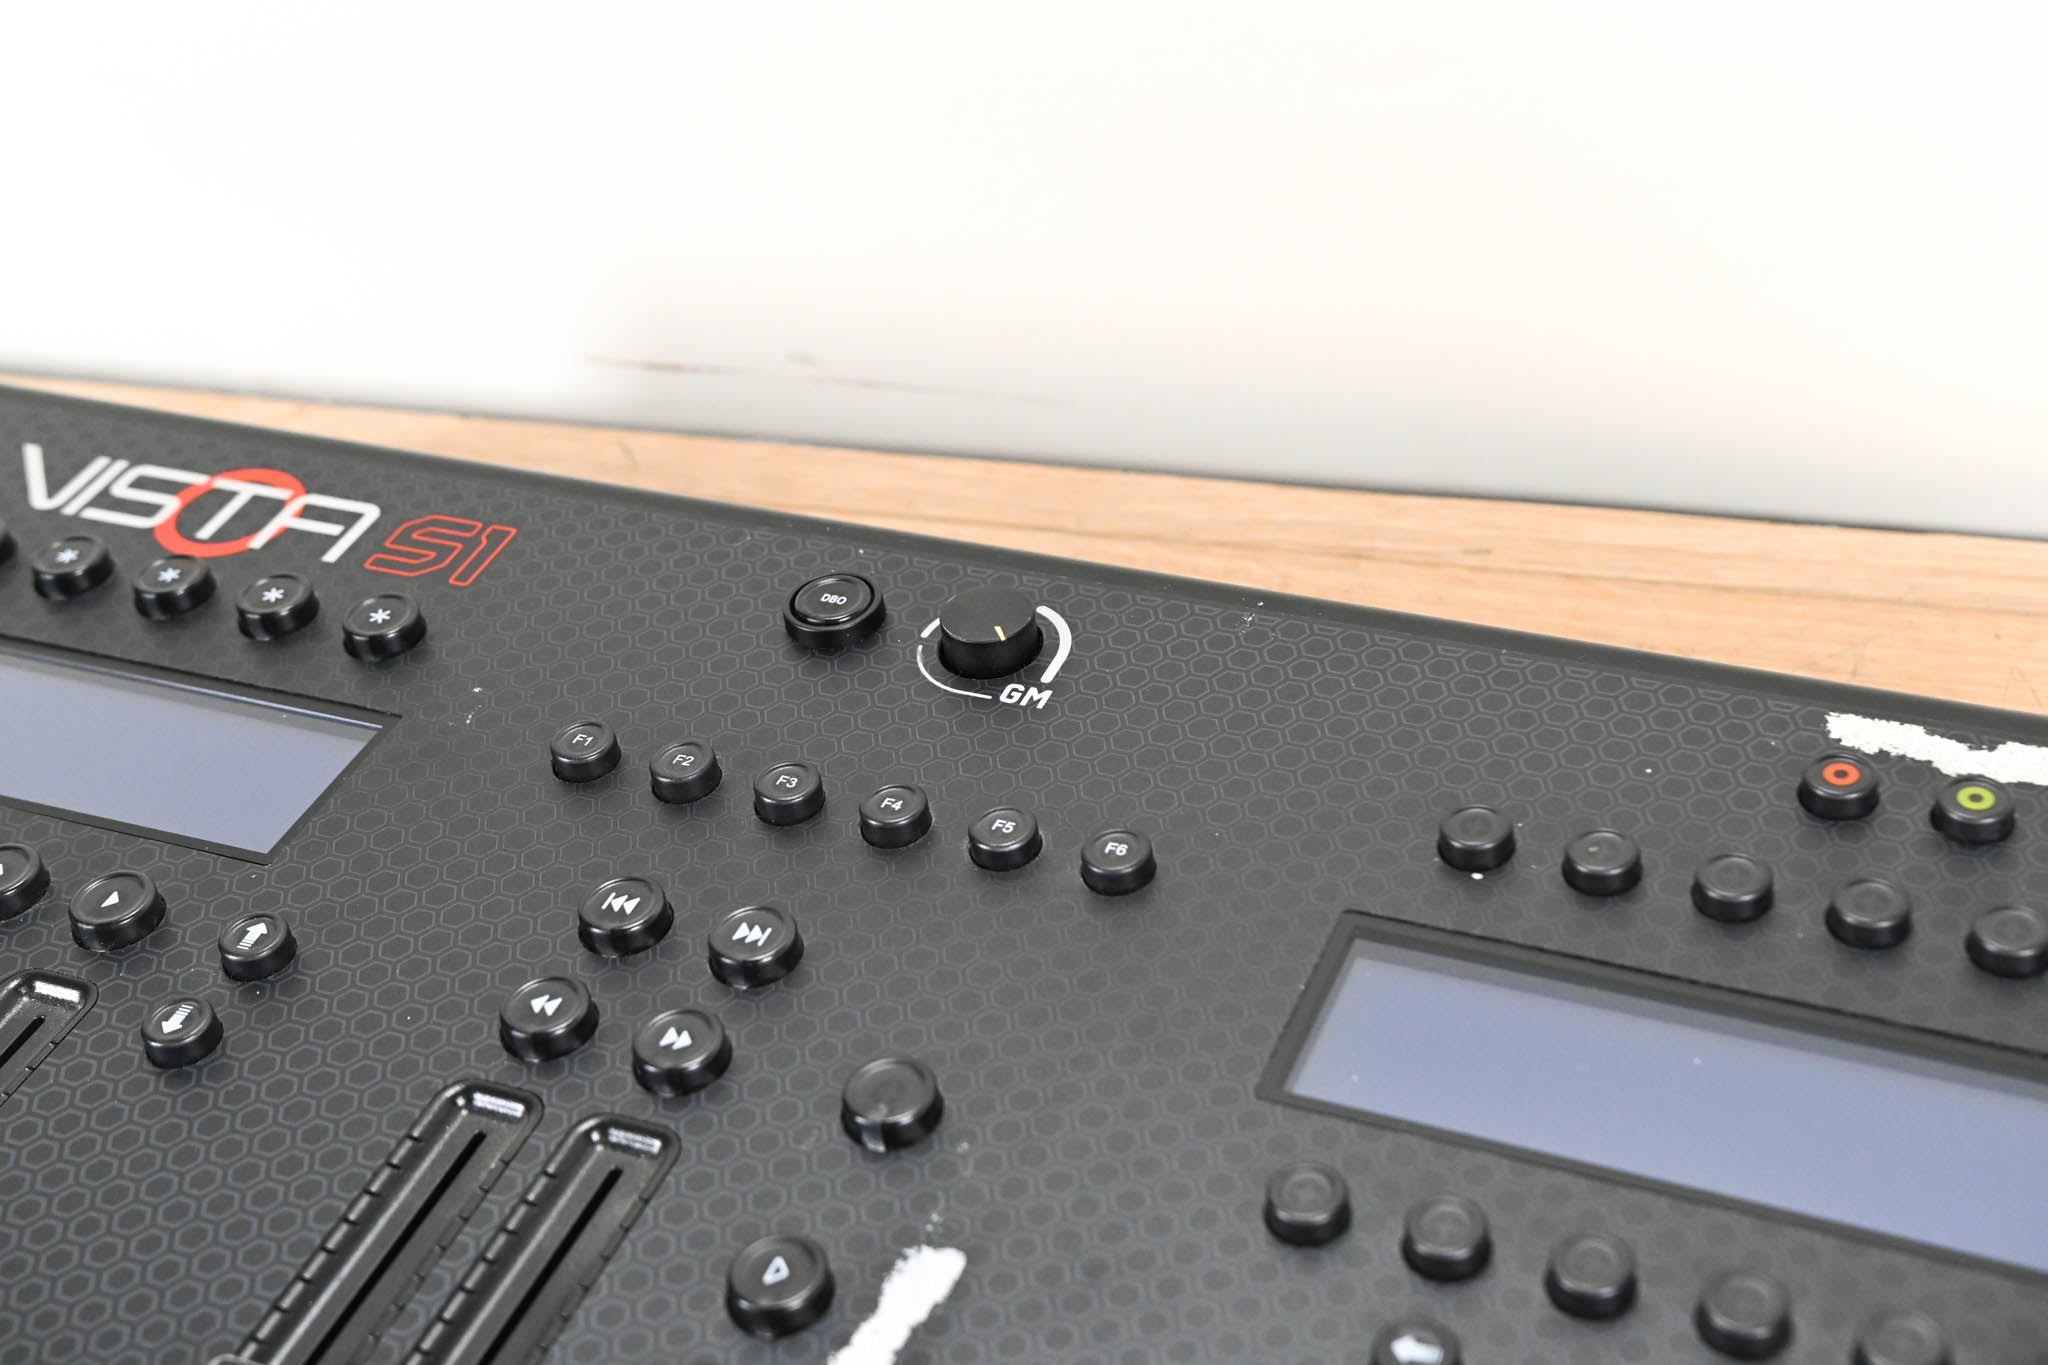 Jands Vista S1 Lighting Console Control Surface